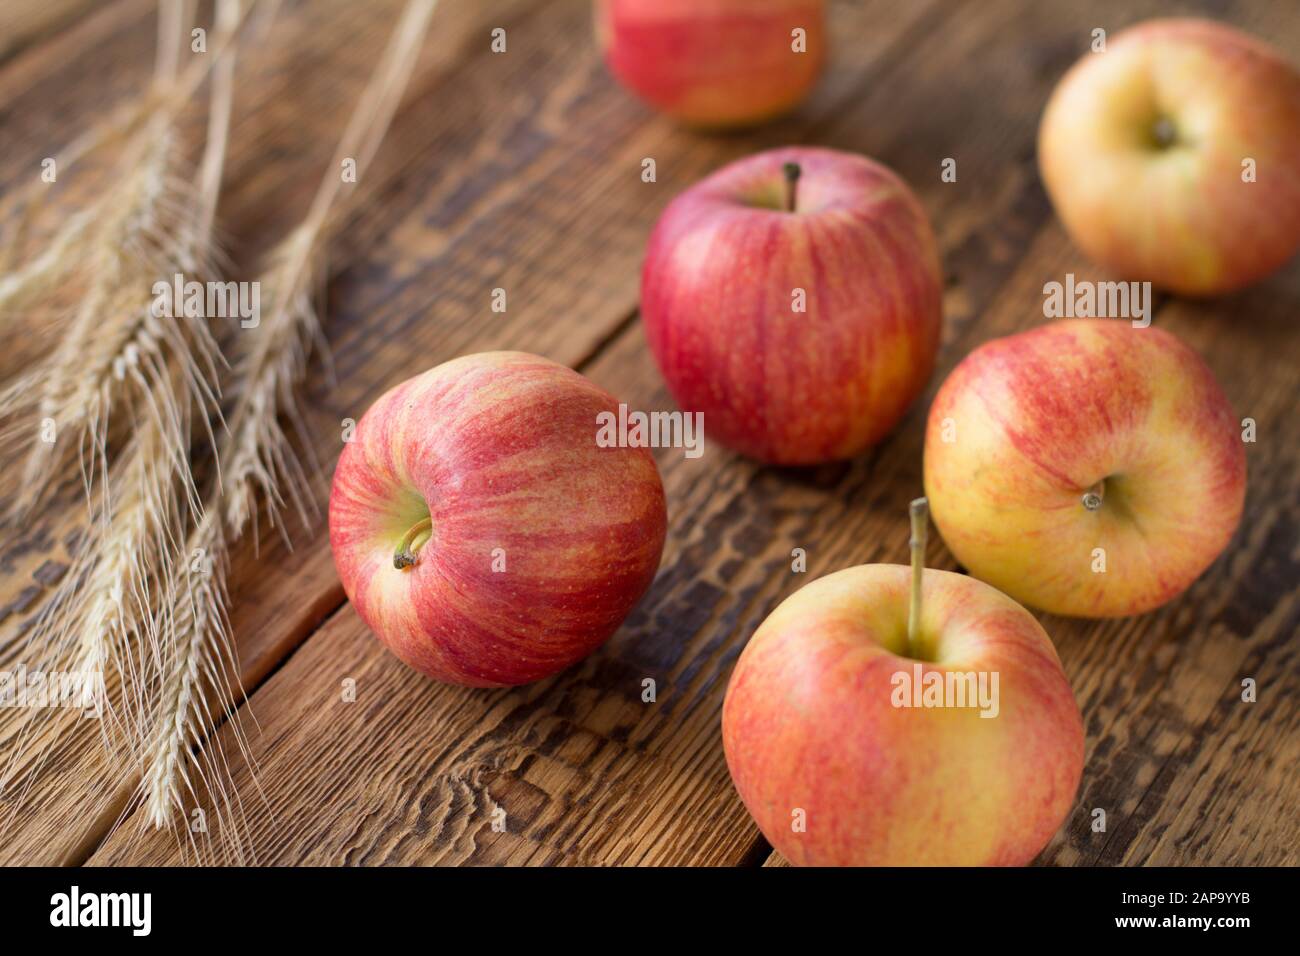 Close-up red apples and wheat ears on wooden background. Shallow depth of field. Focus on apple. Stock Photo